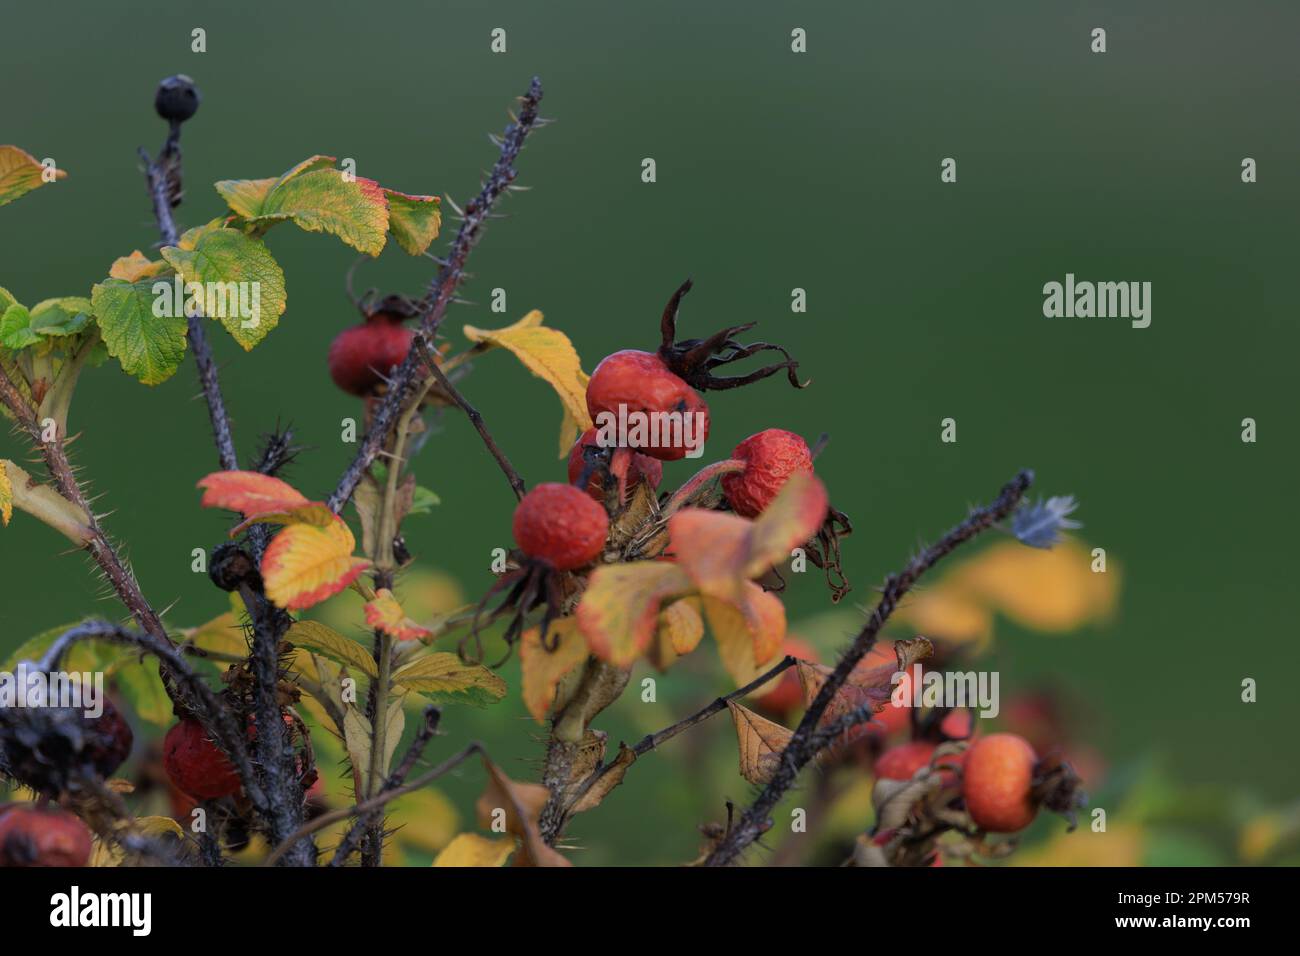 Shrub wild rose hips, leaves and fruits on the branches Stock Photo